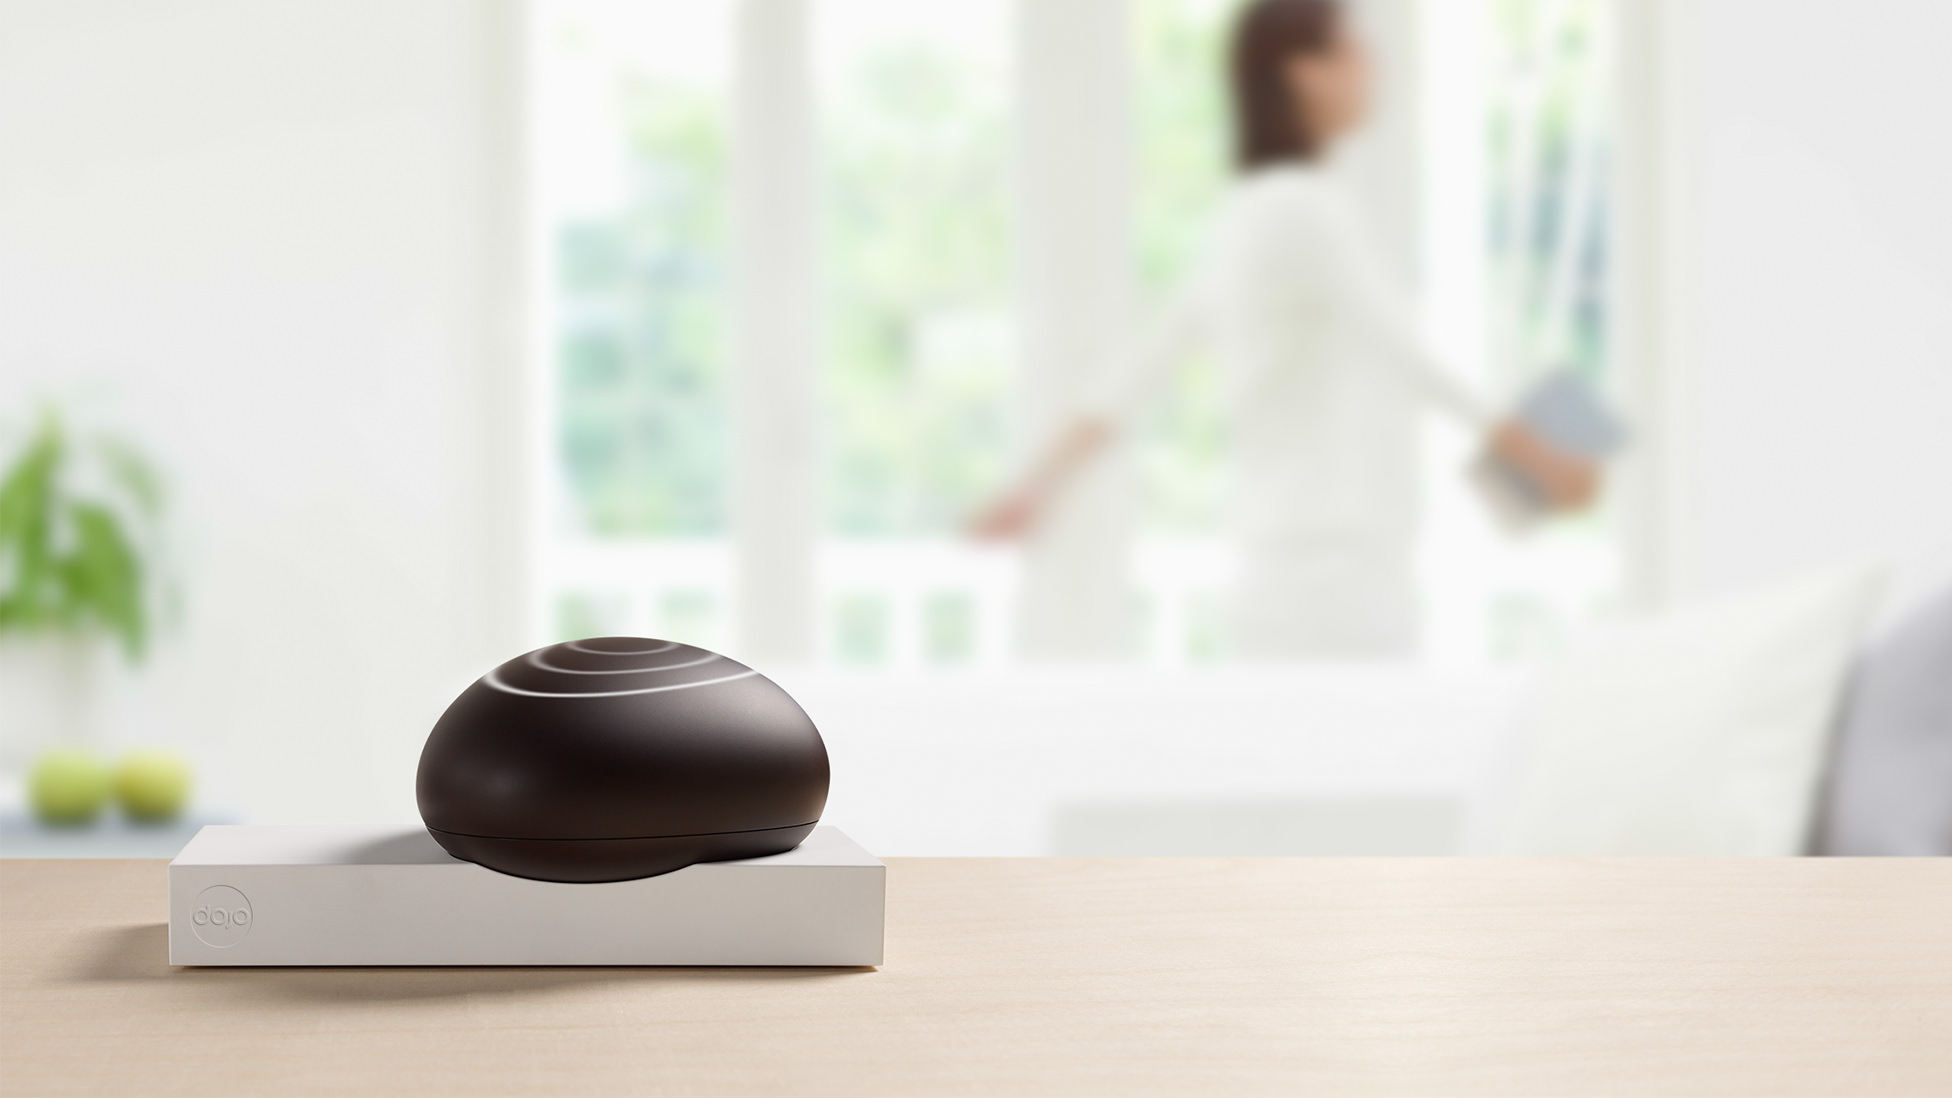 The Dojo gives users the ability to choose their in-home IoT security options. (BullGuard)